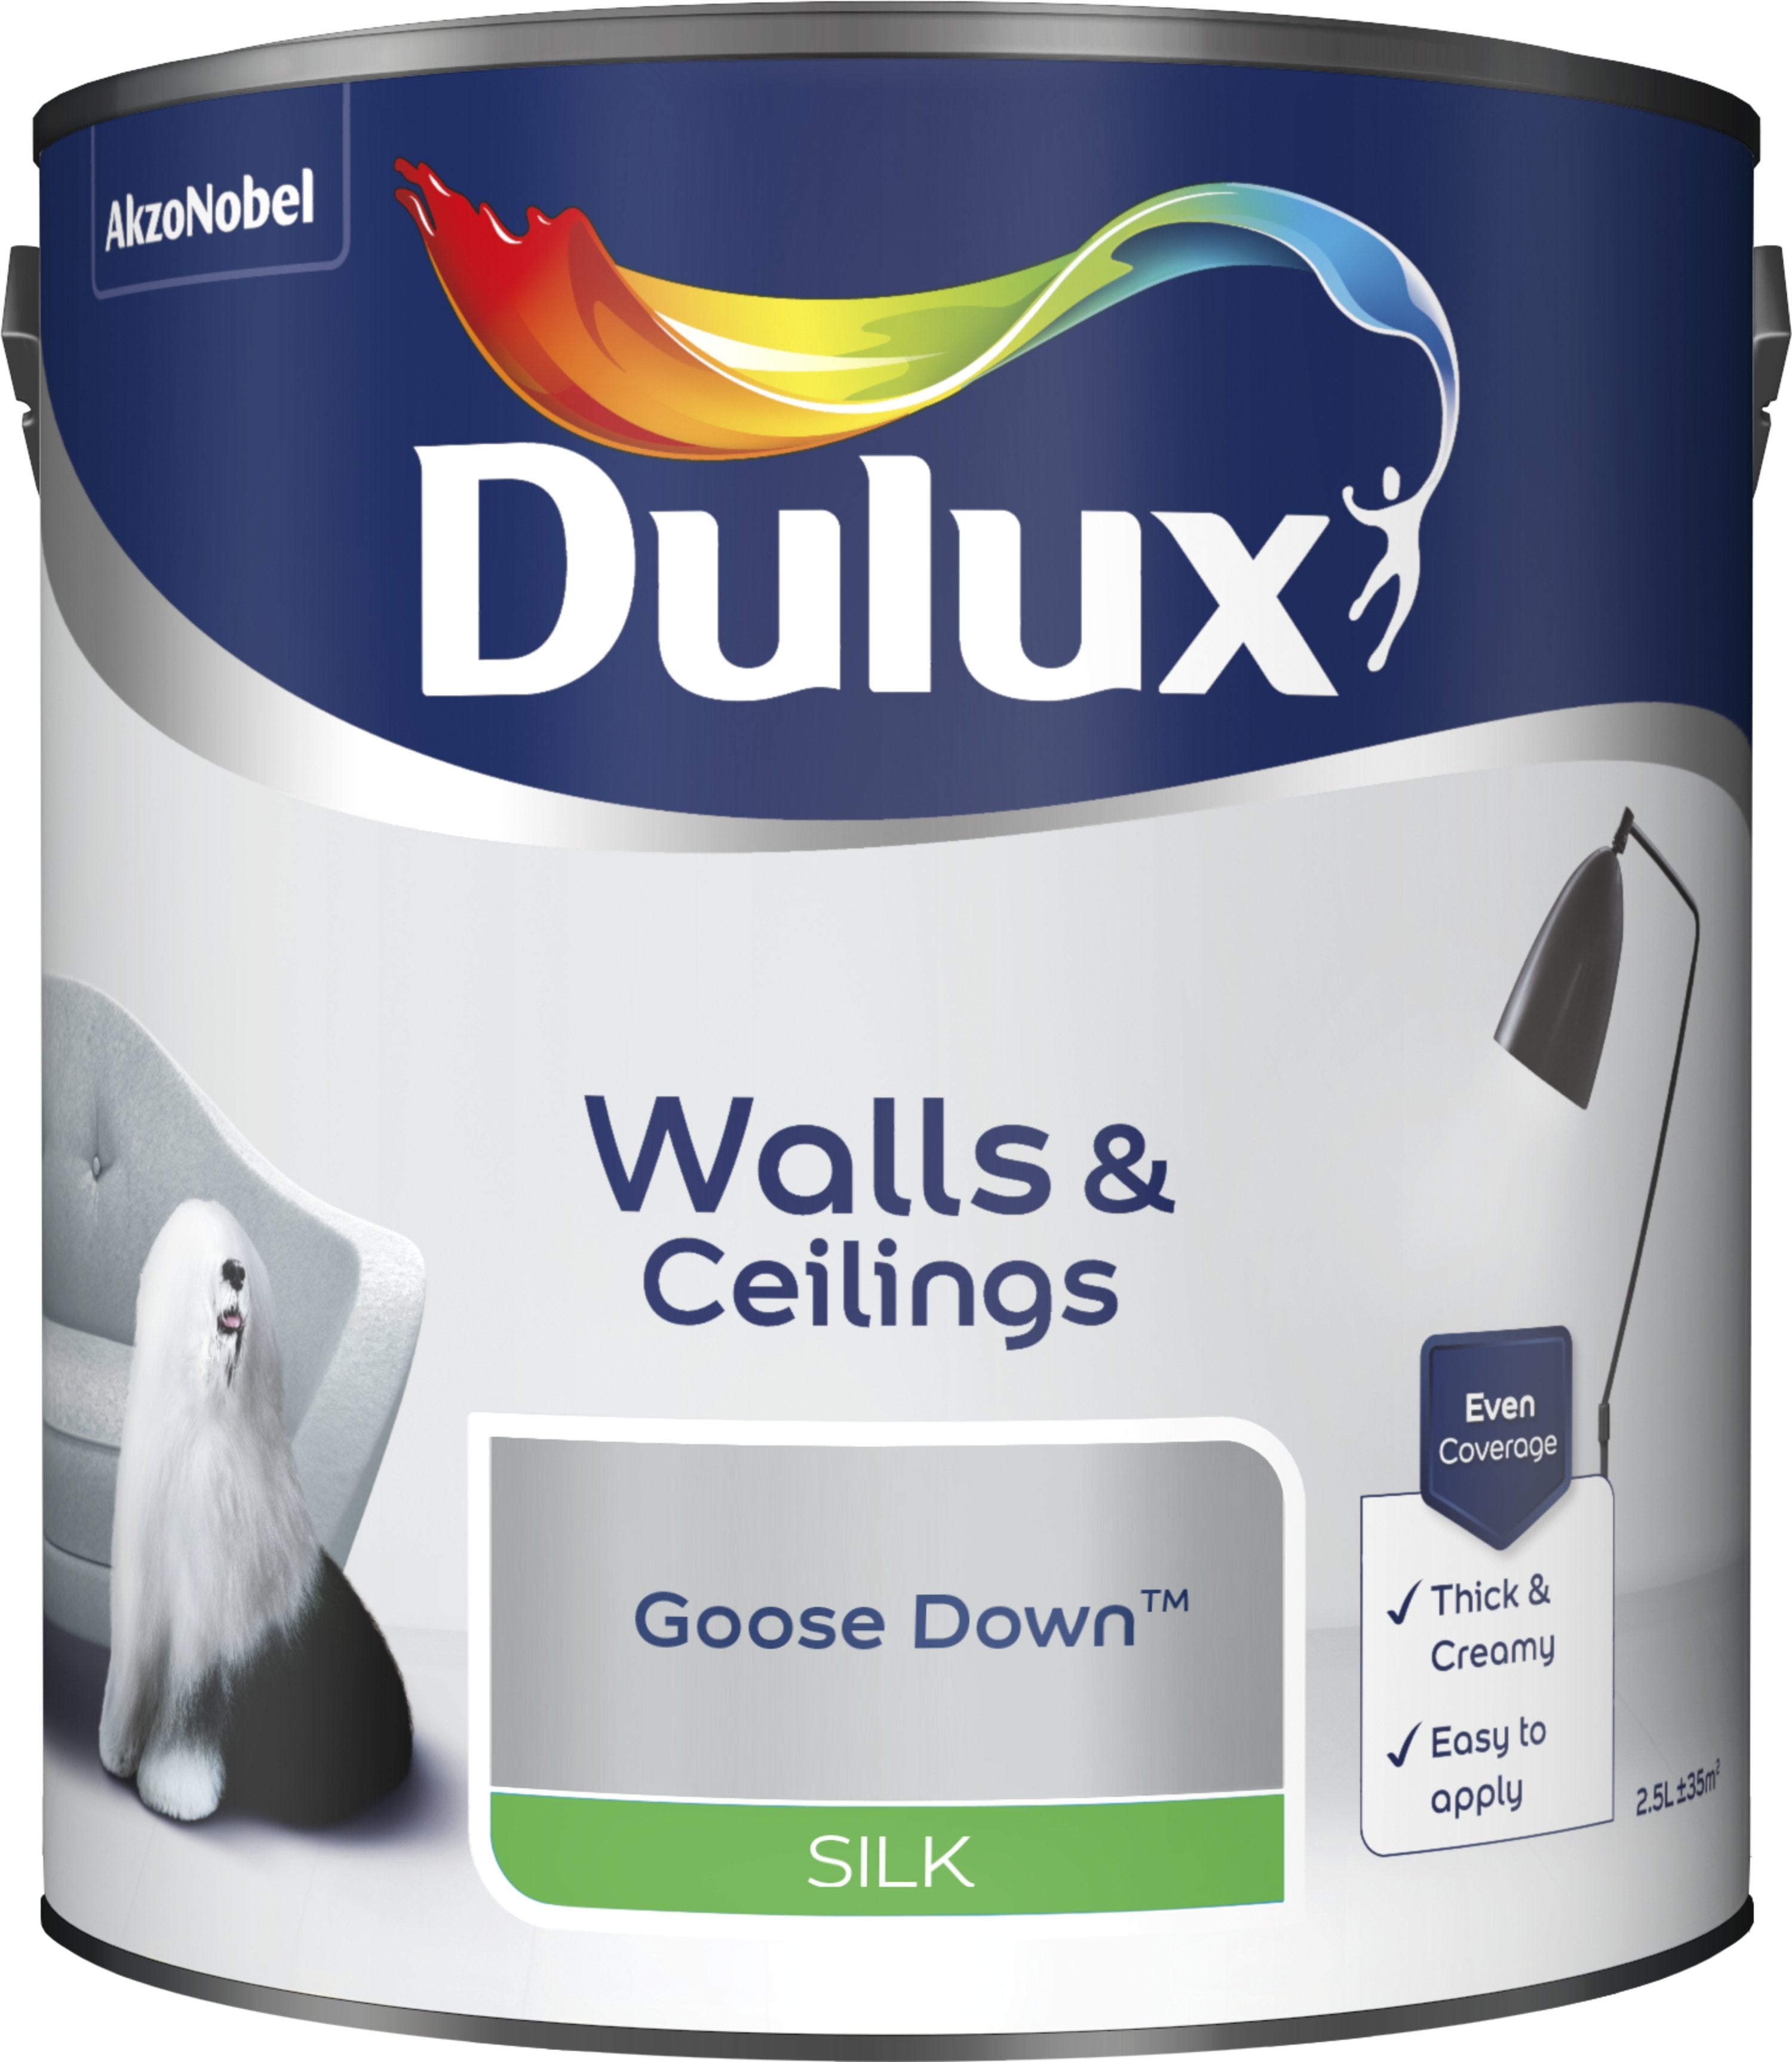 Dulux Silk Emulsion Paint For Walls And Ceilings - Goose Down 2.5L Garden & Diy  Home Improvements  